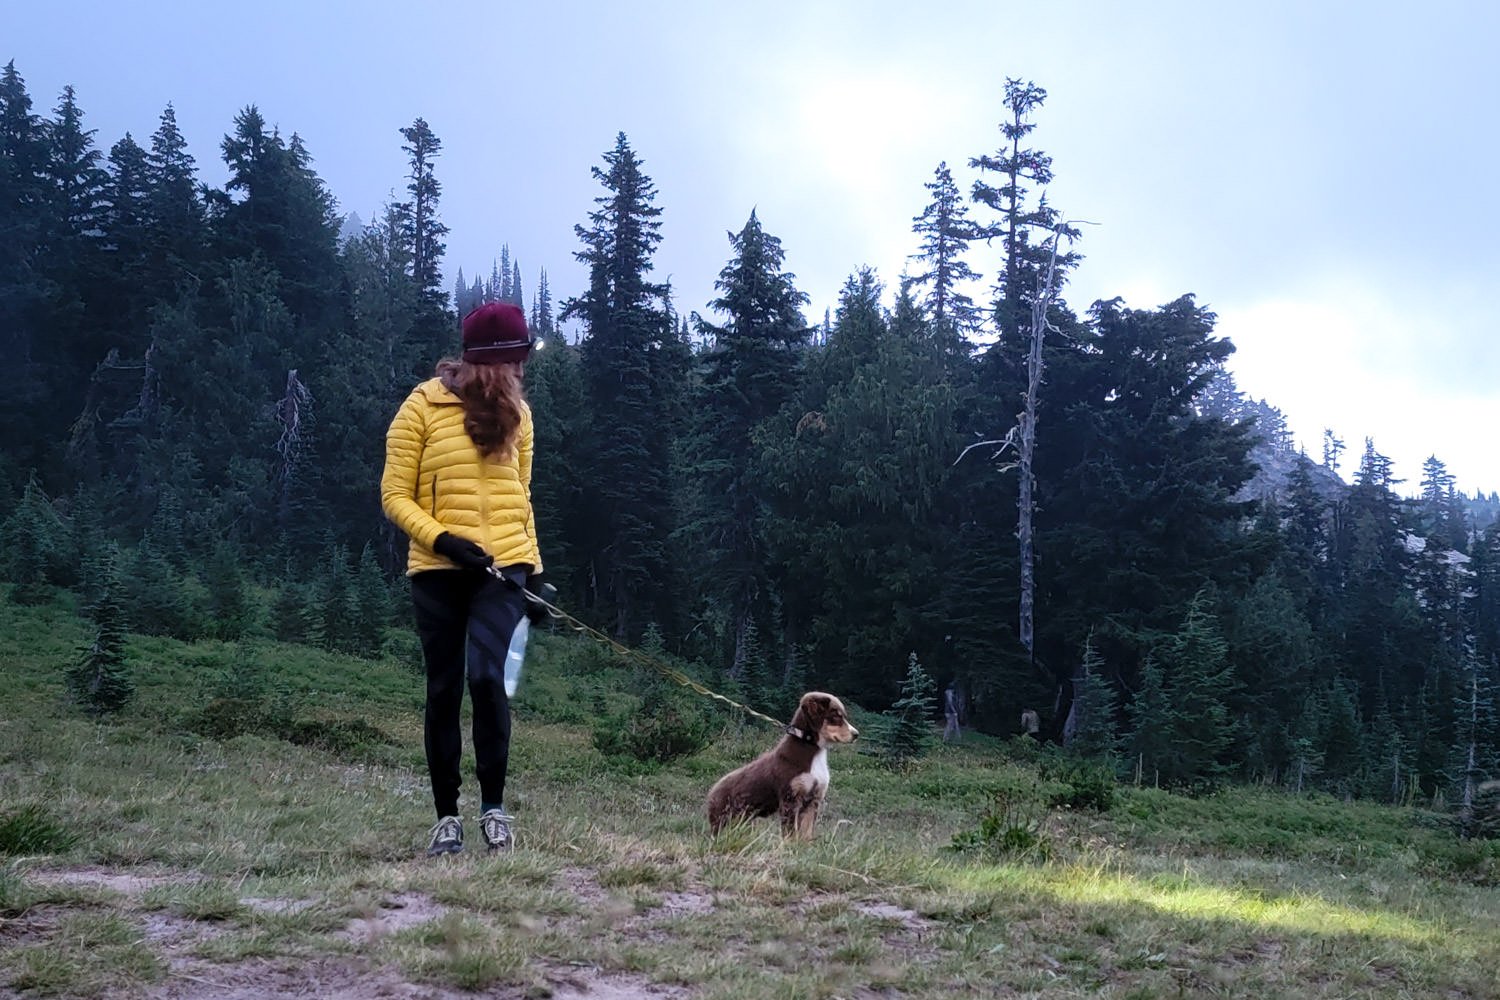 A hiker wearing a headlamp walking a dog on a trail at sunset